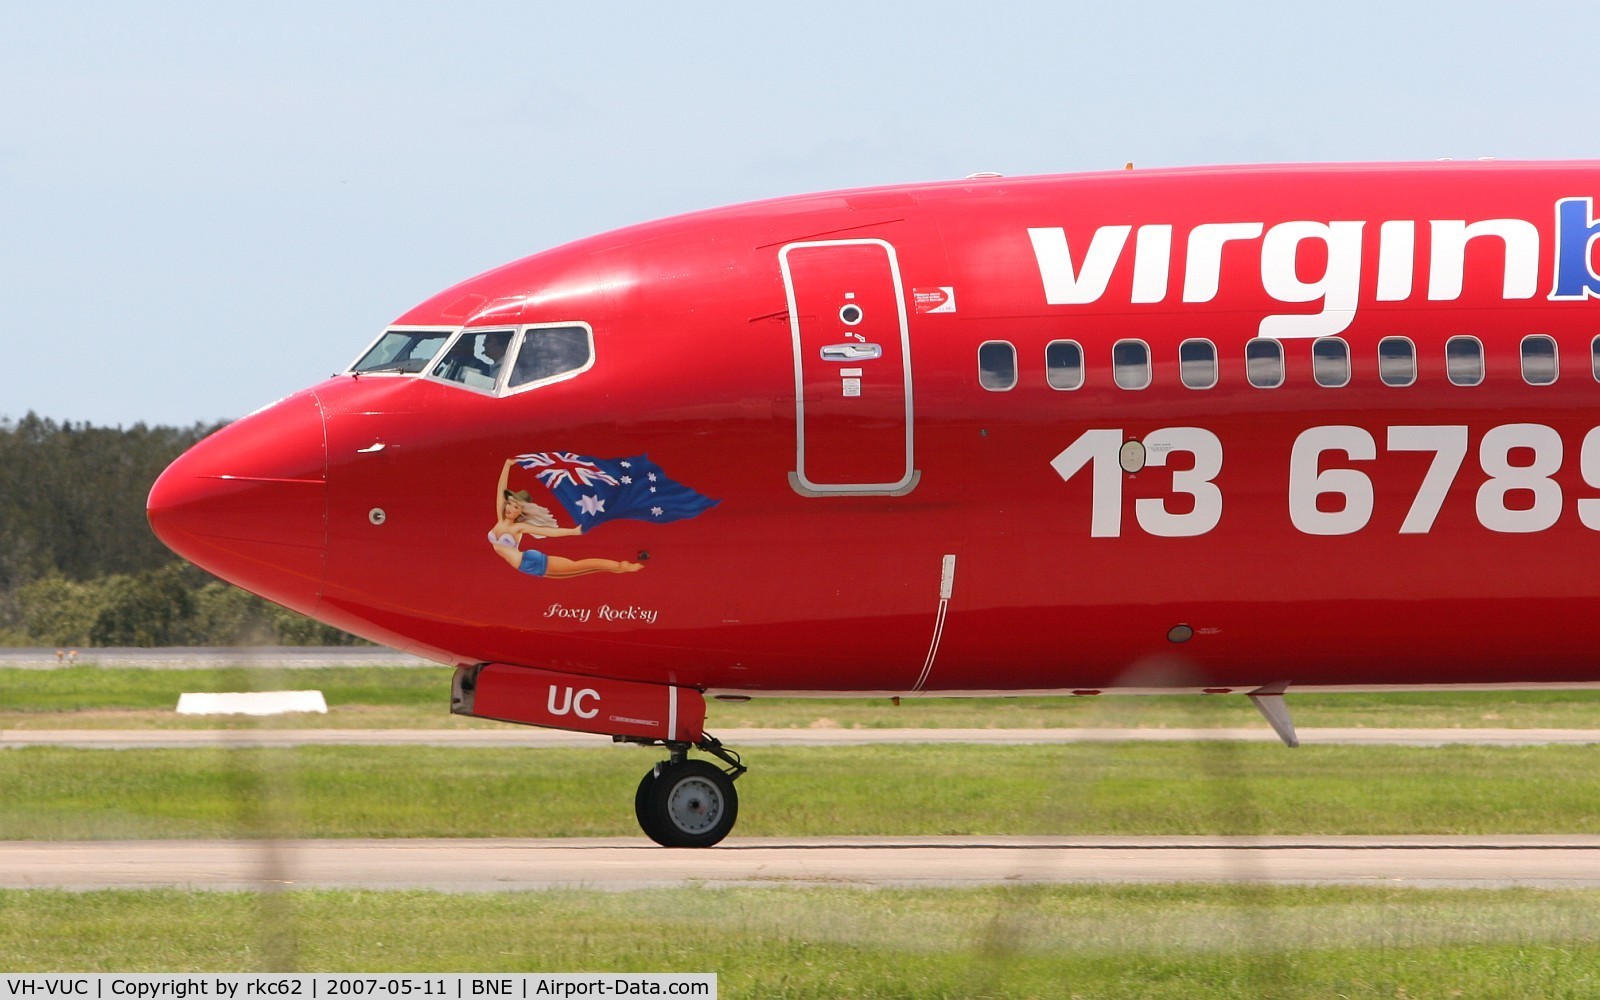 VH-VUC, 2004 Boeing 737-8FE C/N 34014, Foxy Rock'sy Nose Art